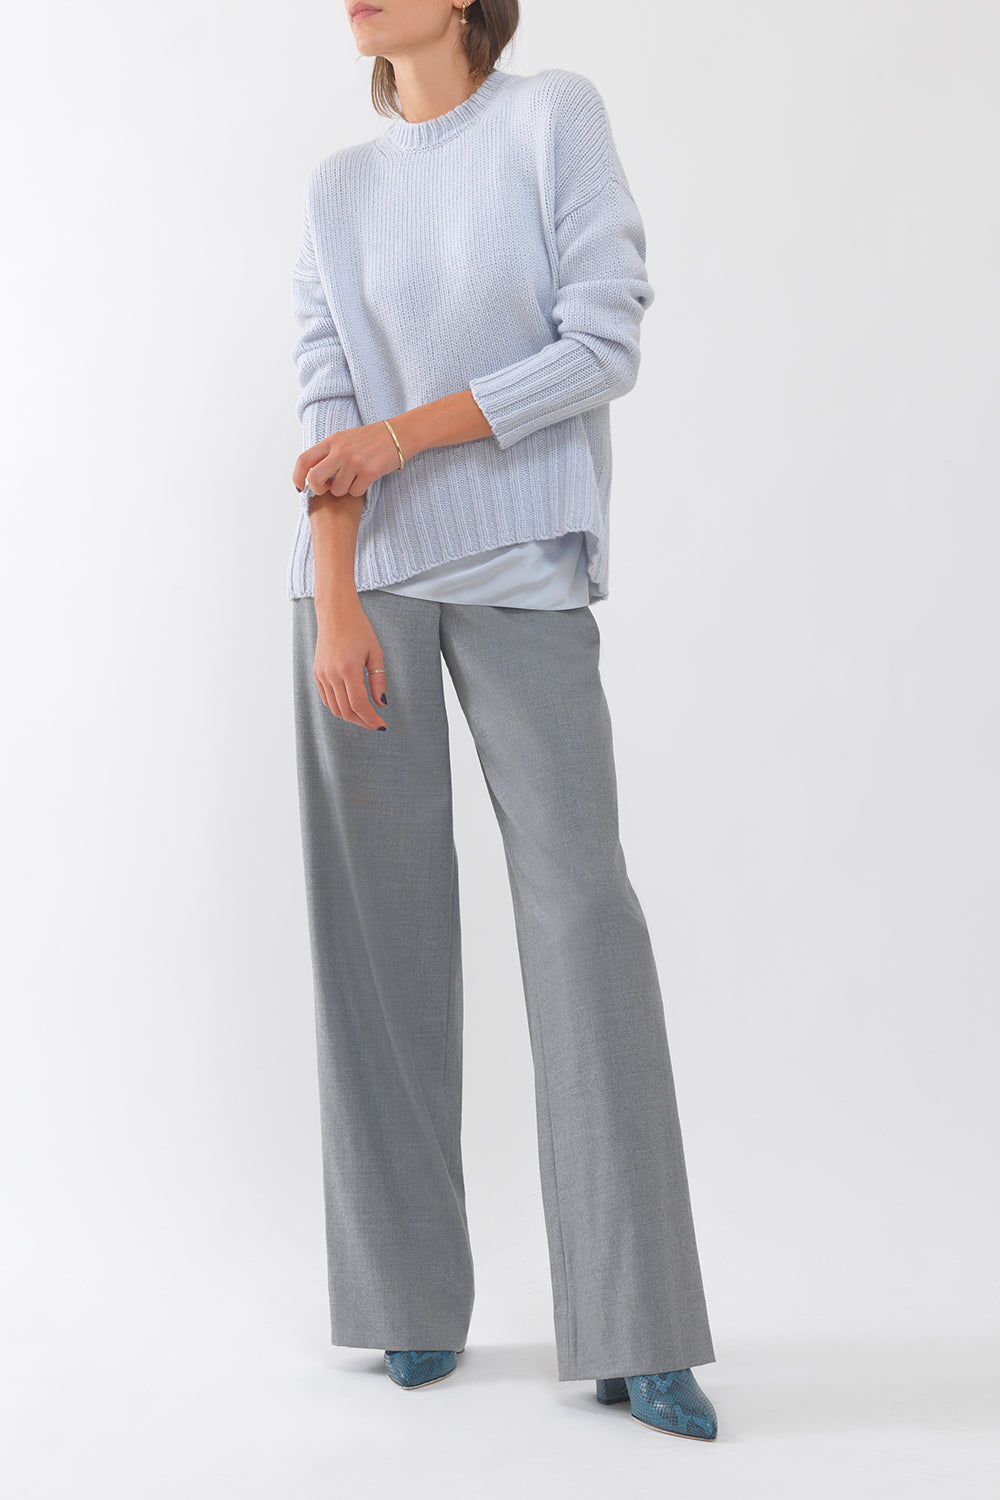 Cashmere Long-Sleeved Pullover with Crewneck - frosty white - worn